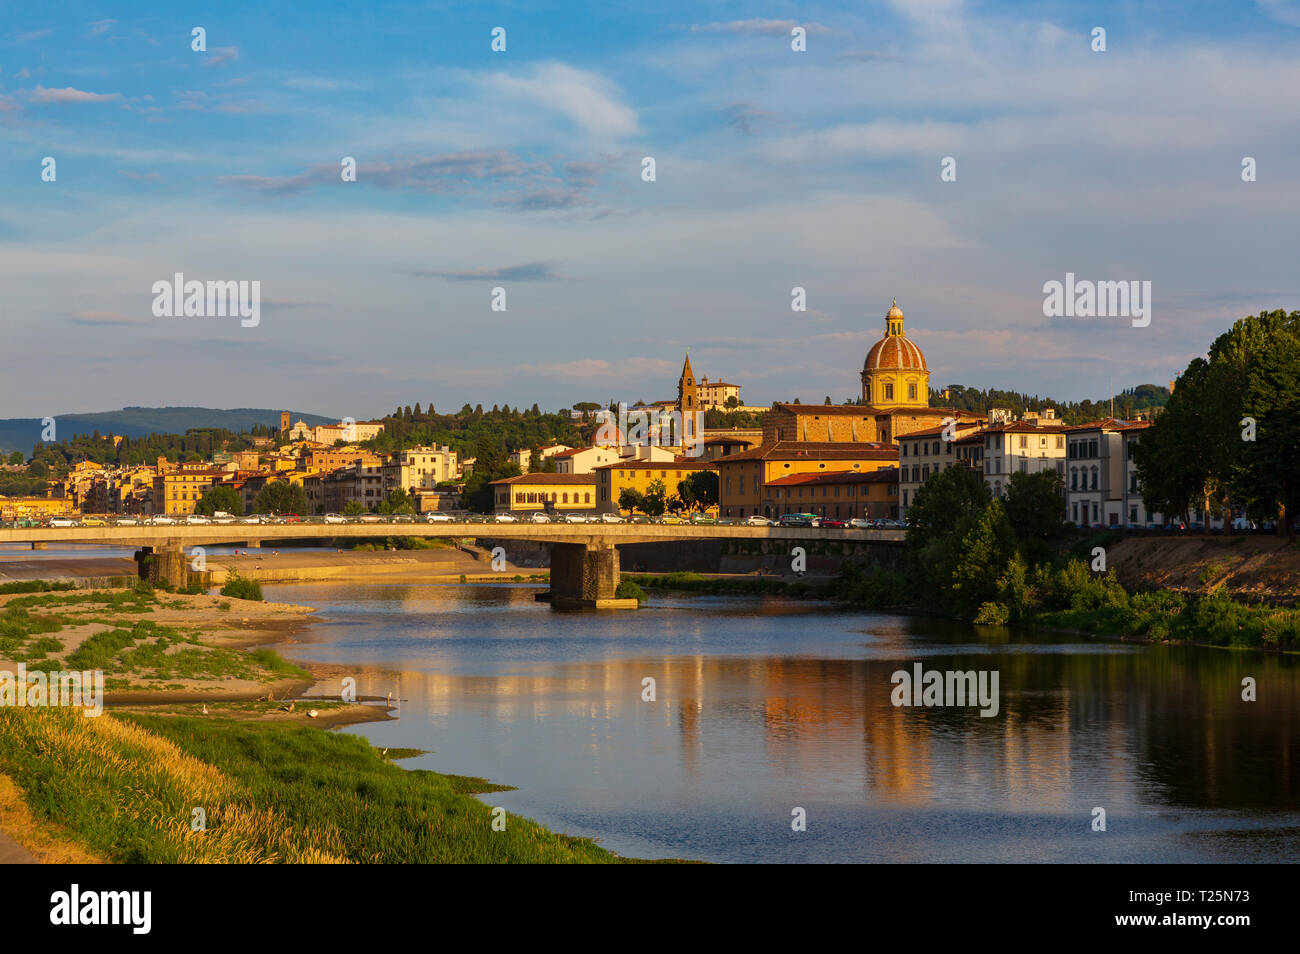 The Arno River in the Tuscany region of Italy, flowing through the heart of Florence, Italy. Stock Photo